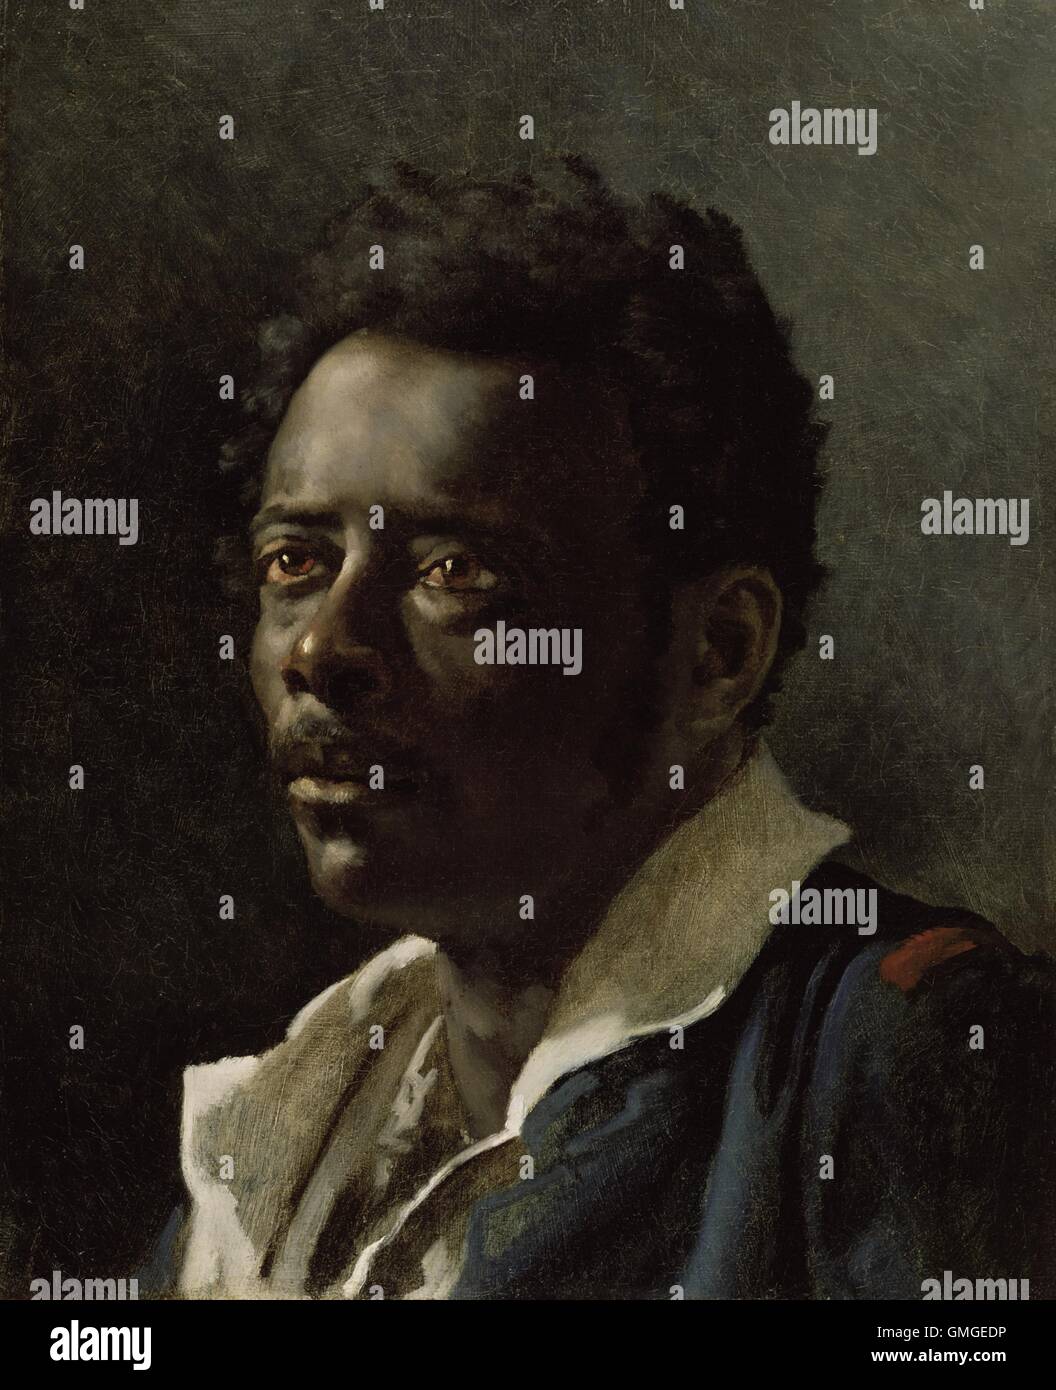 Study of a Model, by Theodore Gericault, 1818-19, French painting, oil on canvas. Portrait of an African man was a study for Gericault's most famous painting, 'The Raft of the Medusa', 1819. The sitter wears a shirt similar to those worn by the survivors (BSLOC 2016 6 127) Stock Photo